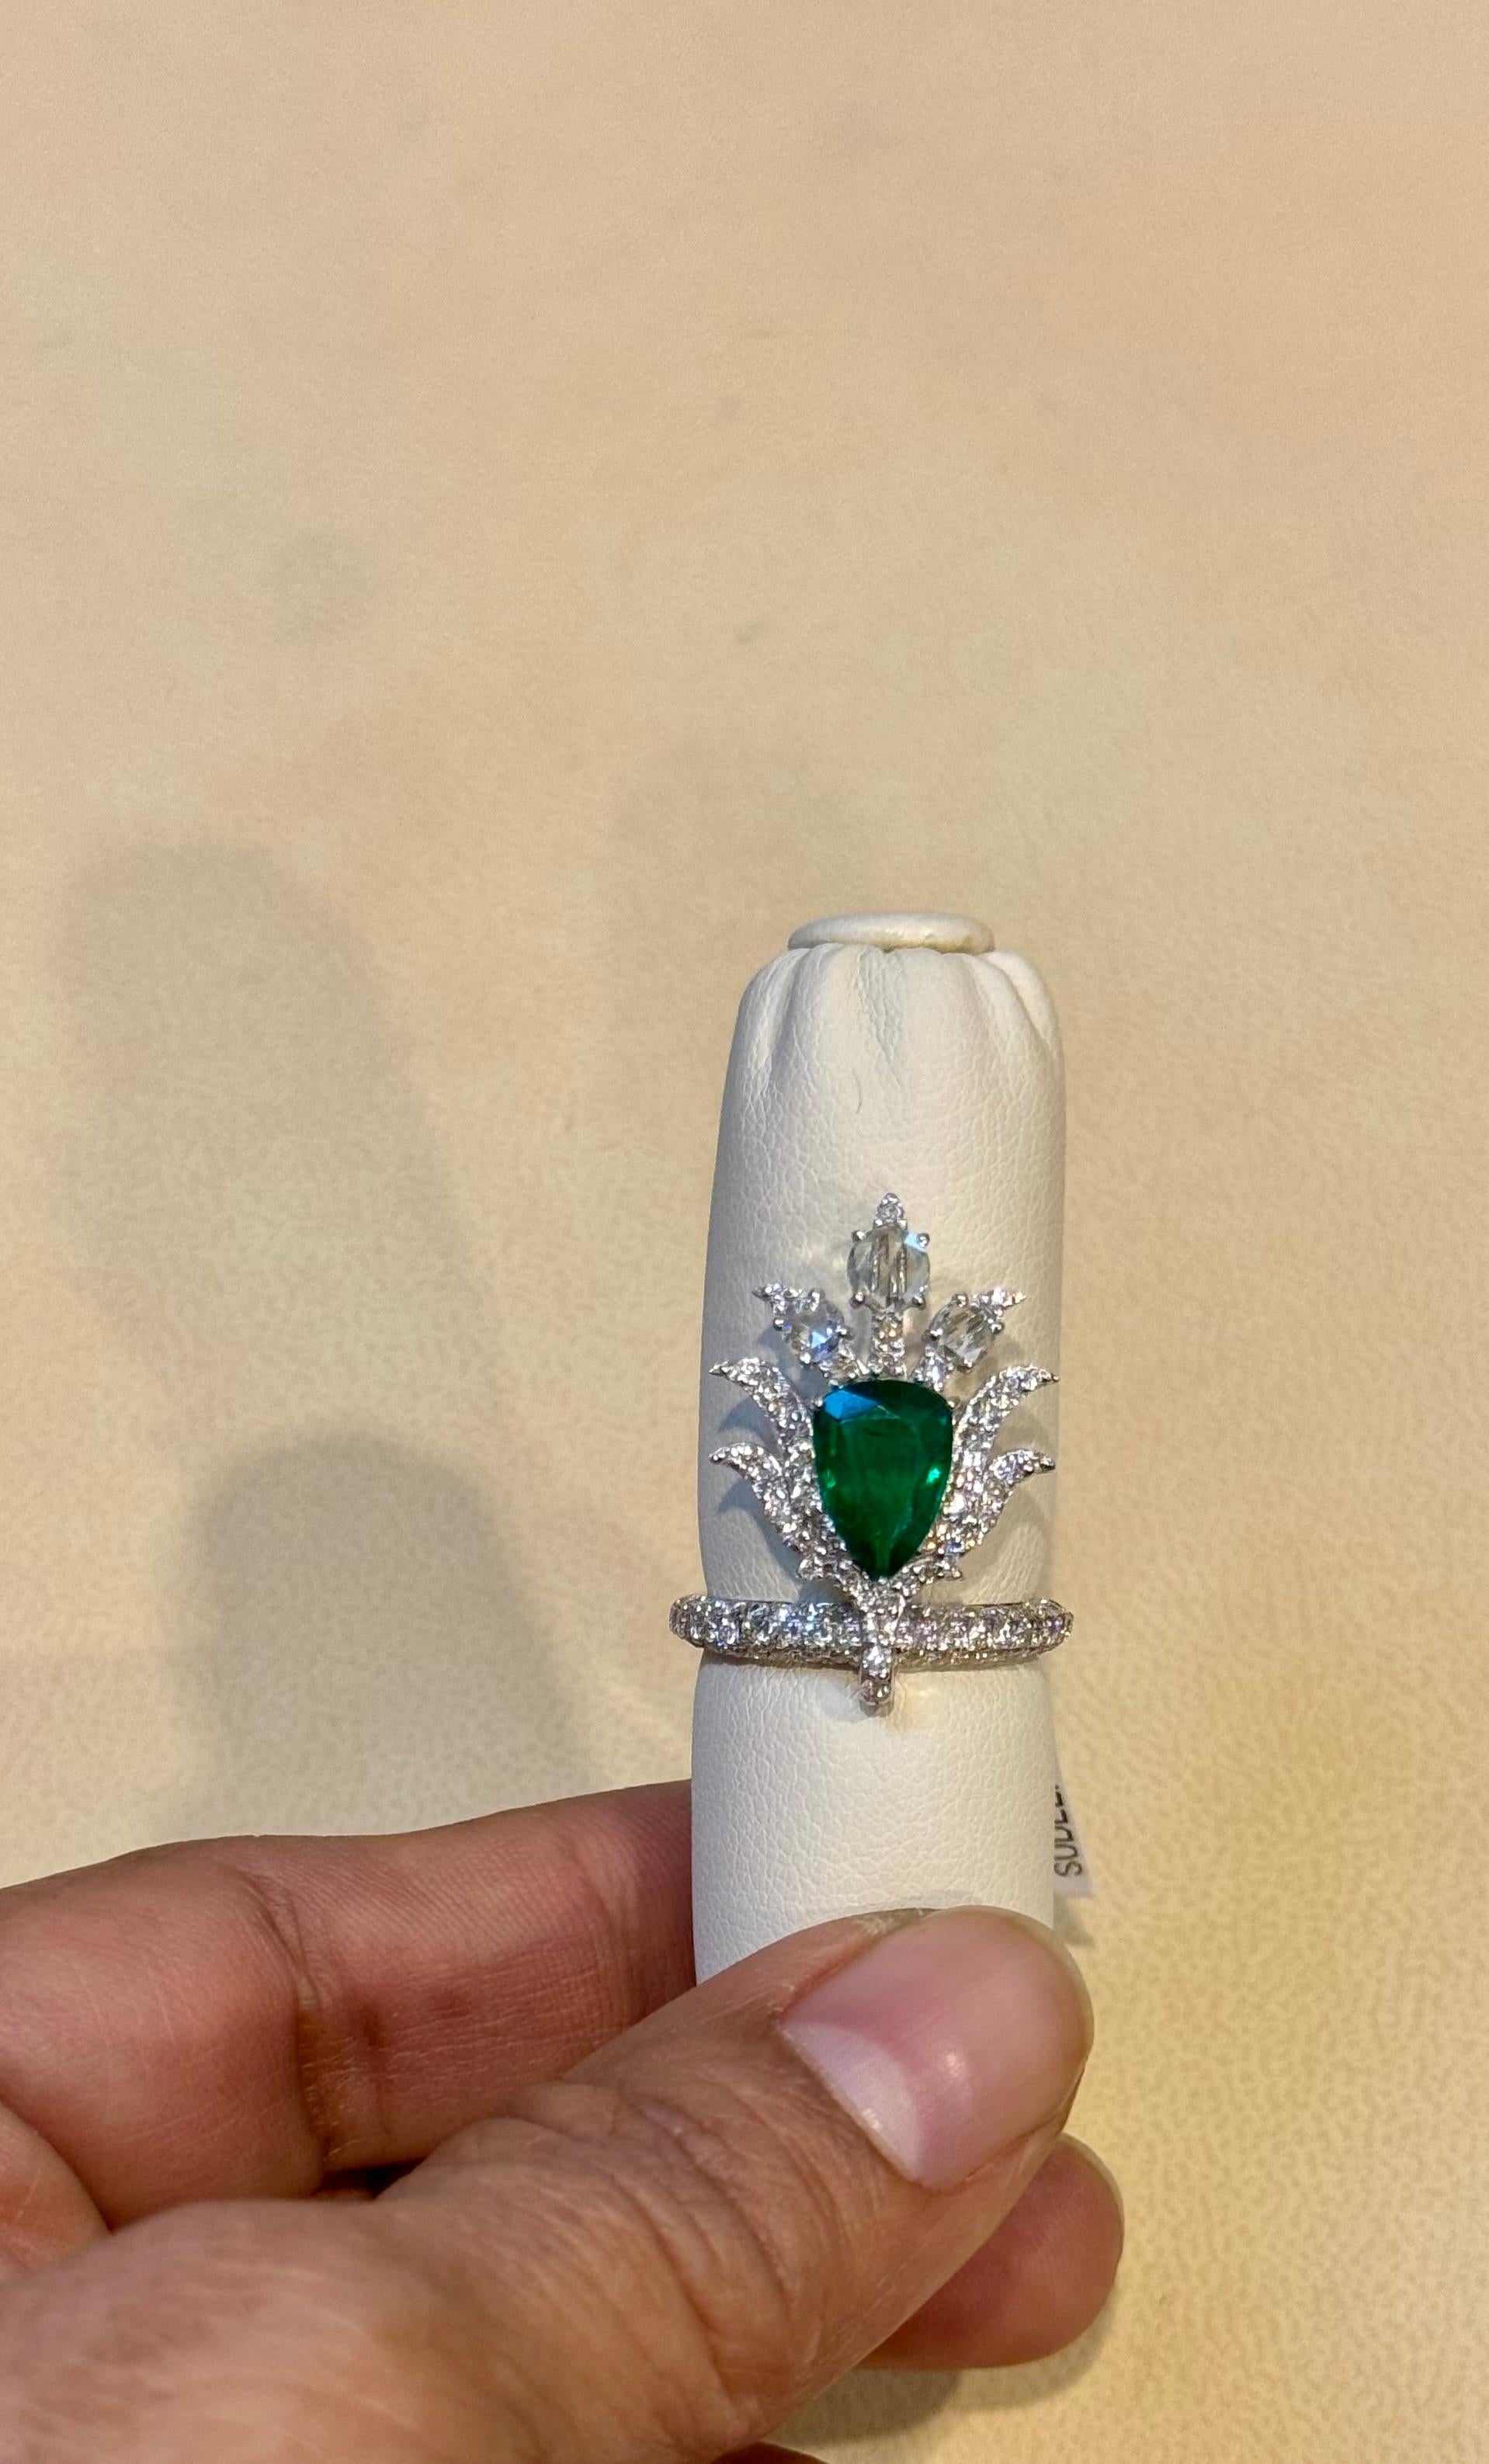 2 Ct Finest Zambian Pear Emerald & 2 Ct Diamond Ring in 18 Kt Gold Size 7 For Sale 4